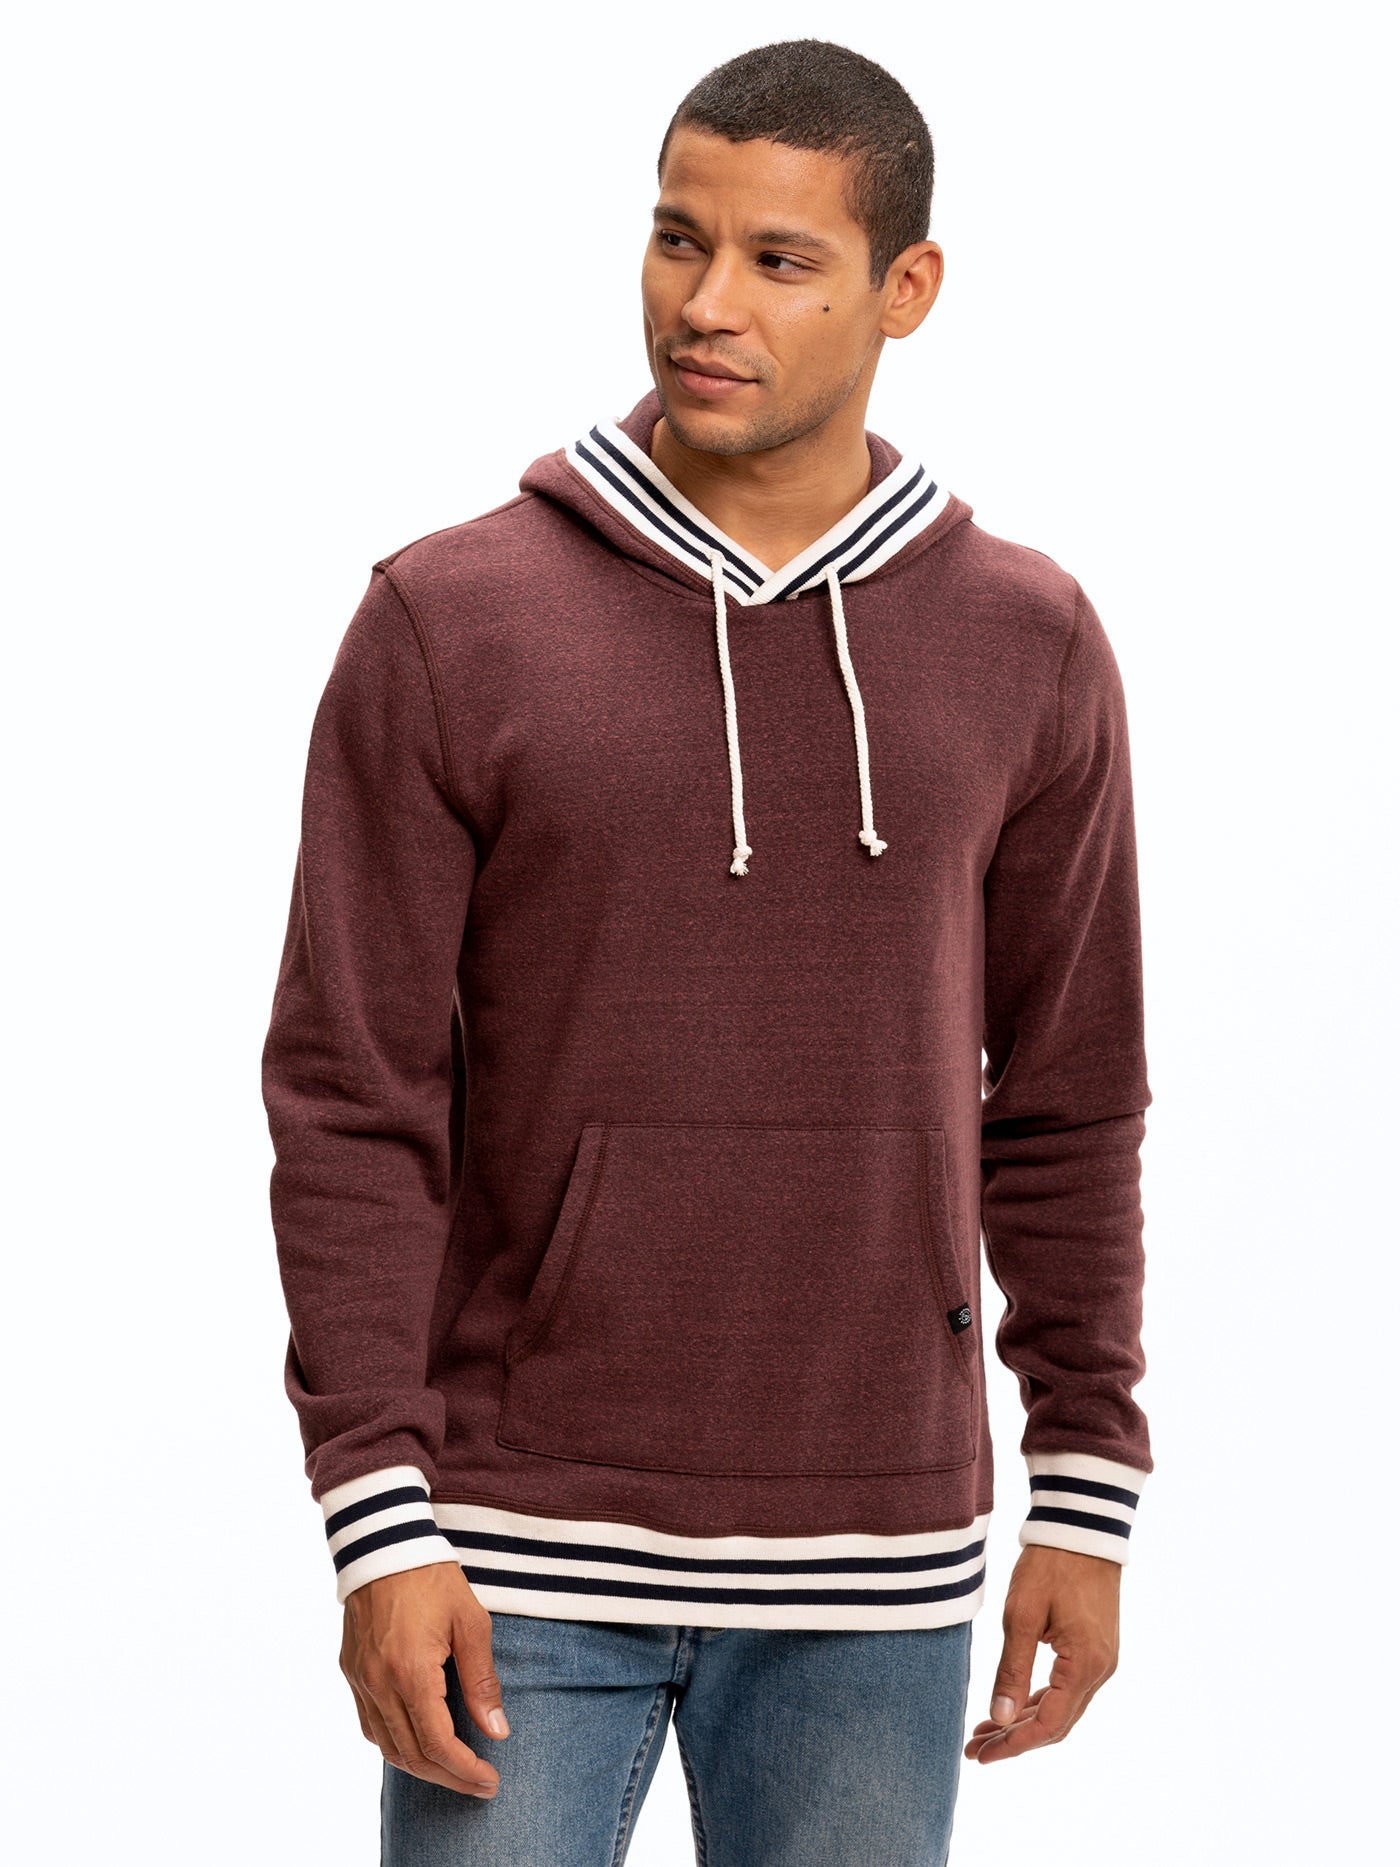 Tyson Contrast Rib Pullover Hoodie Mens Outerwear Sweatshirt Threads 4 Thought 